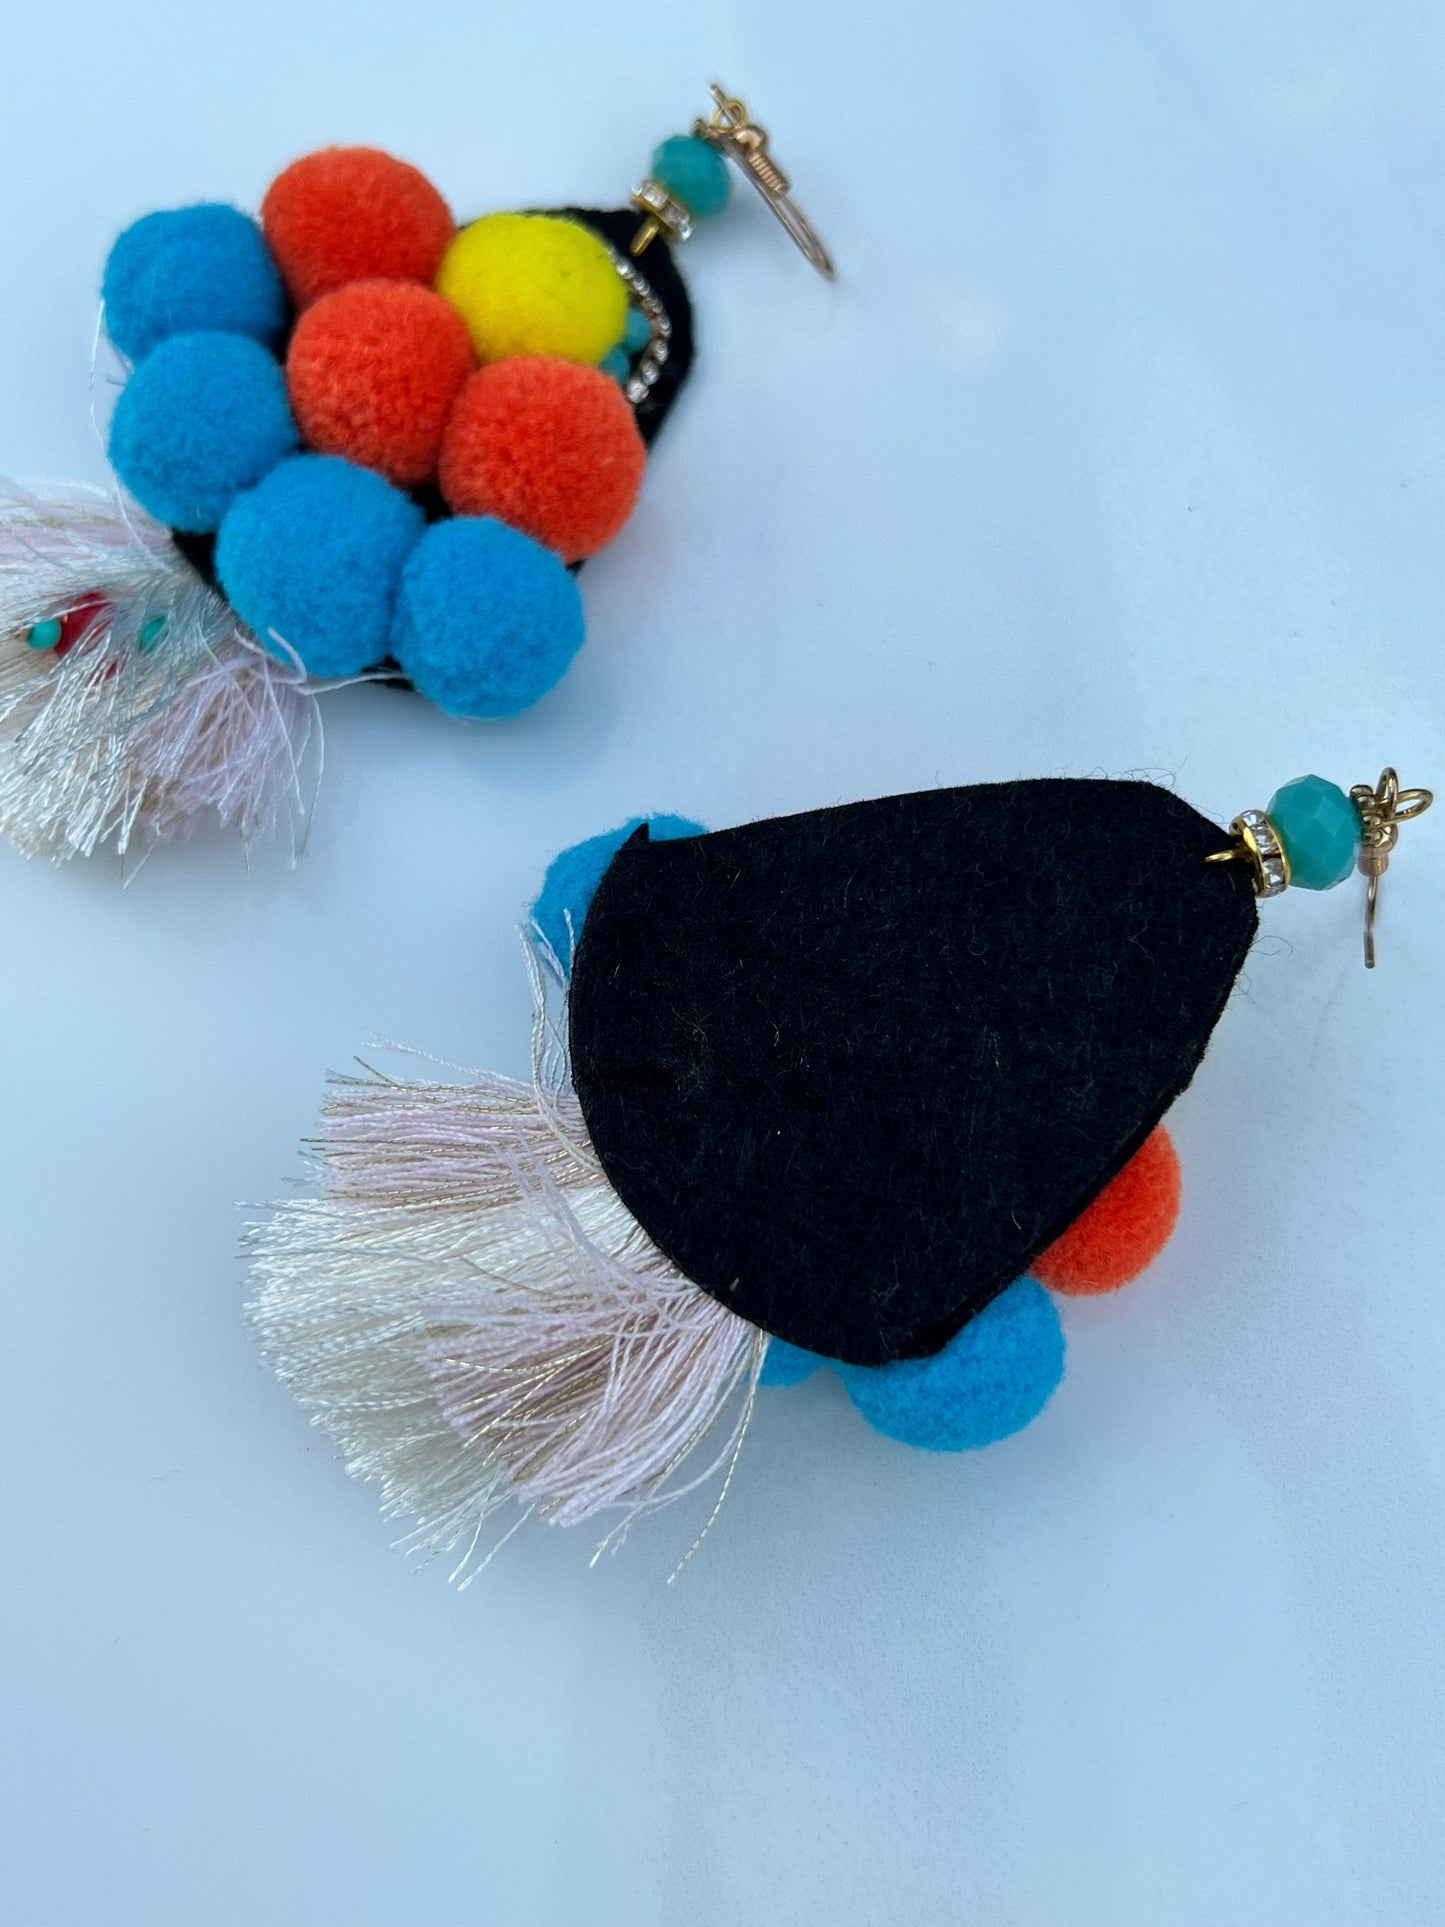 Pom poms, tassels and crystal's all wrapped into one earring!  Vibrant yellows, blues and oranges.    As these are handmade, imperfections could be expected, a true statement